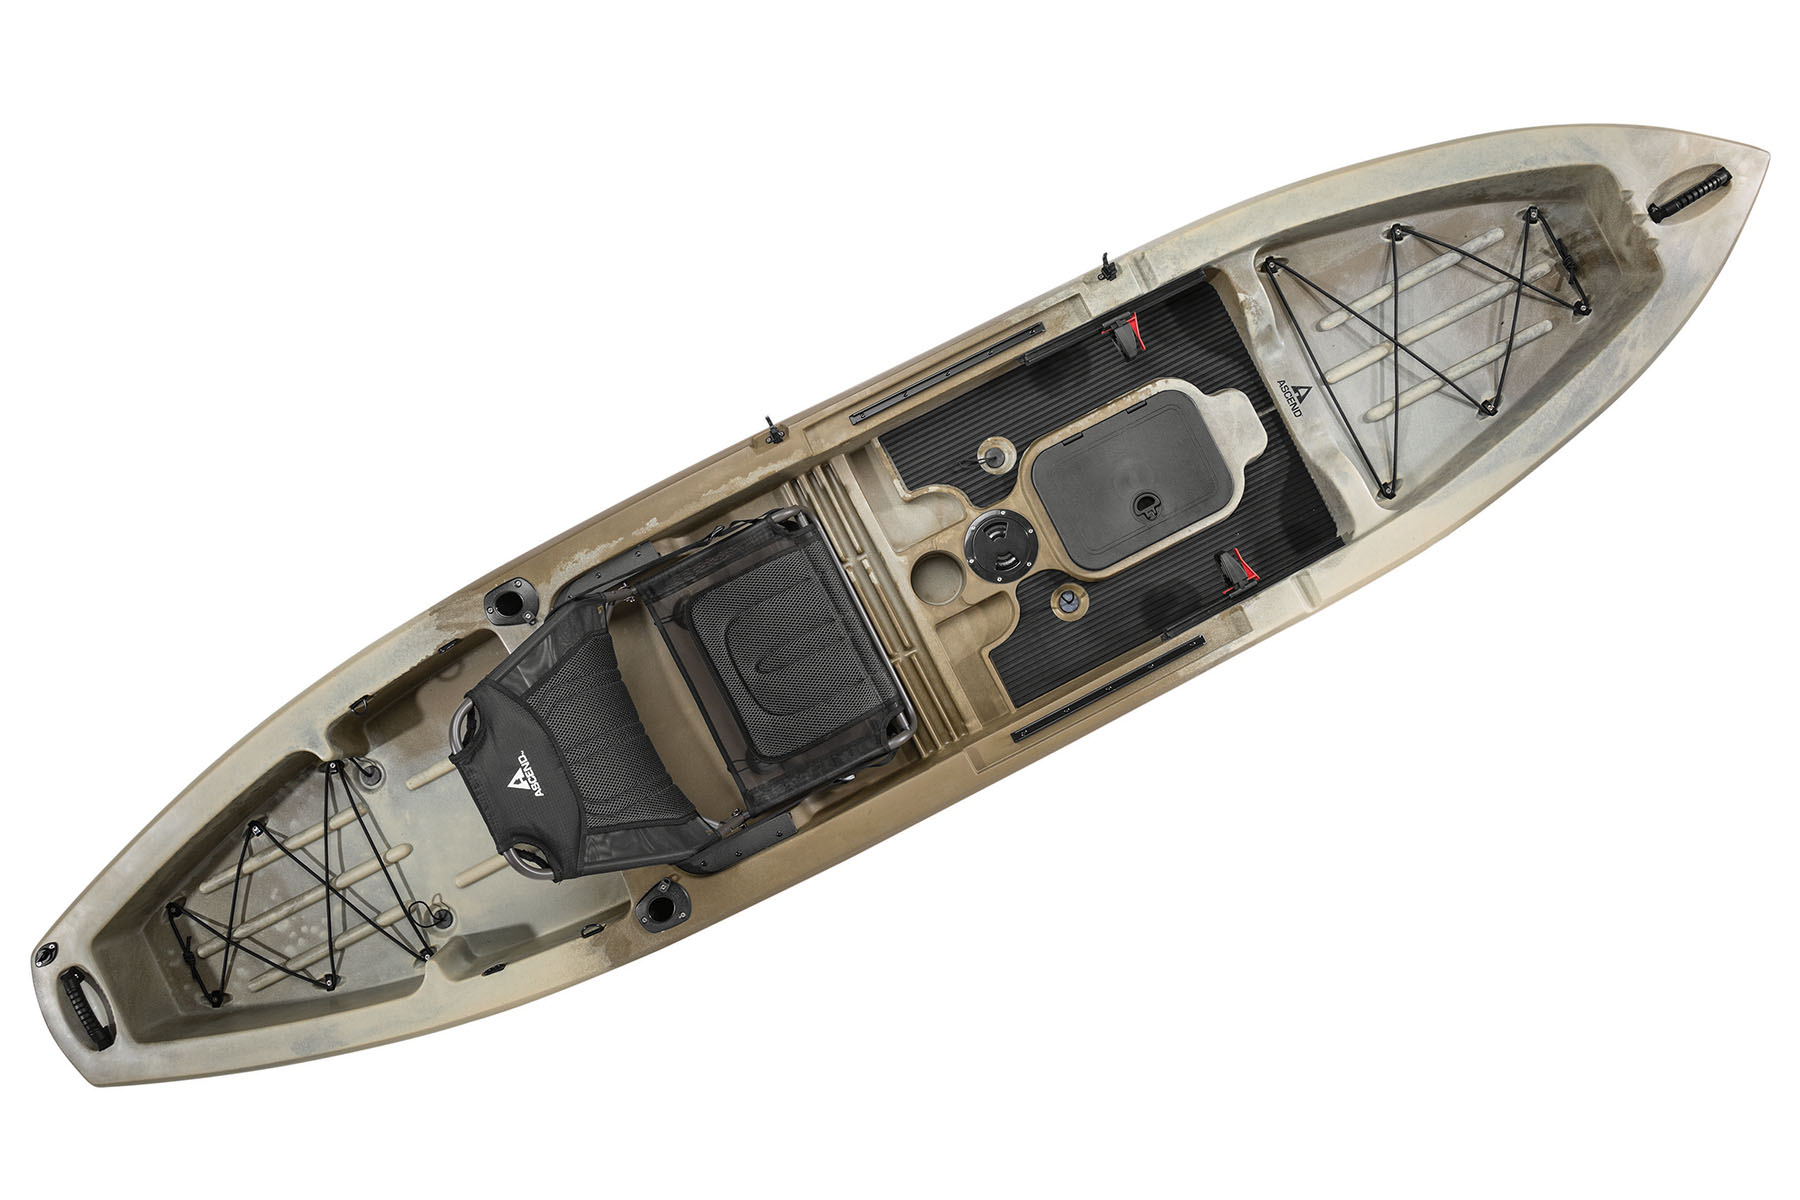 ASCEND 133X Sit-On Kayak with YAK Power